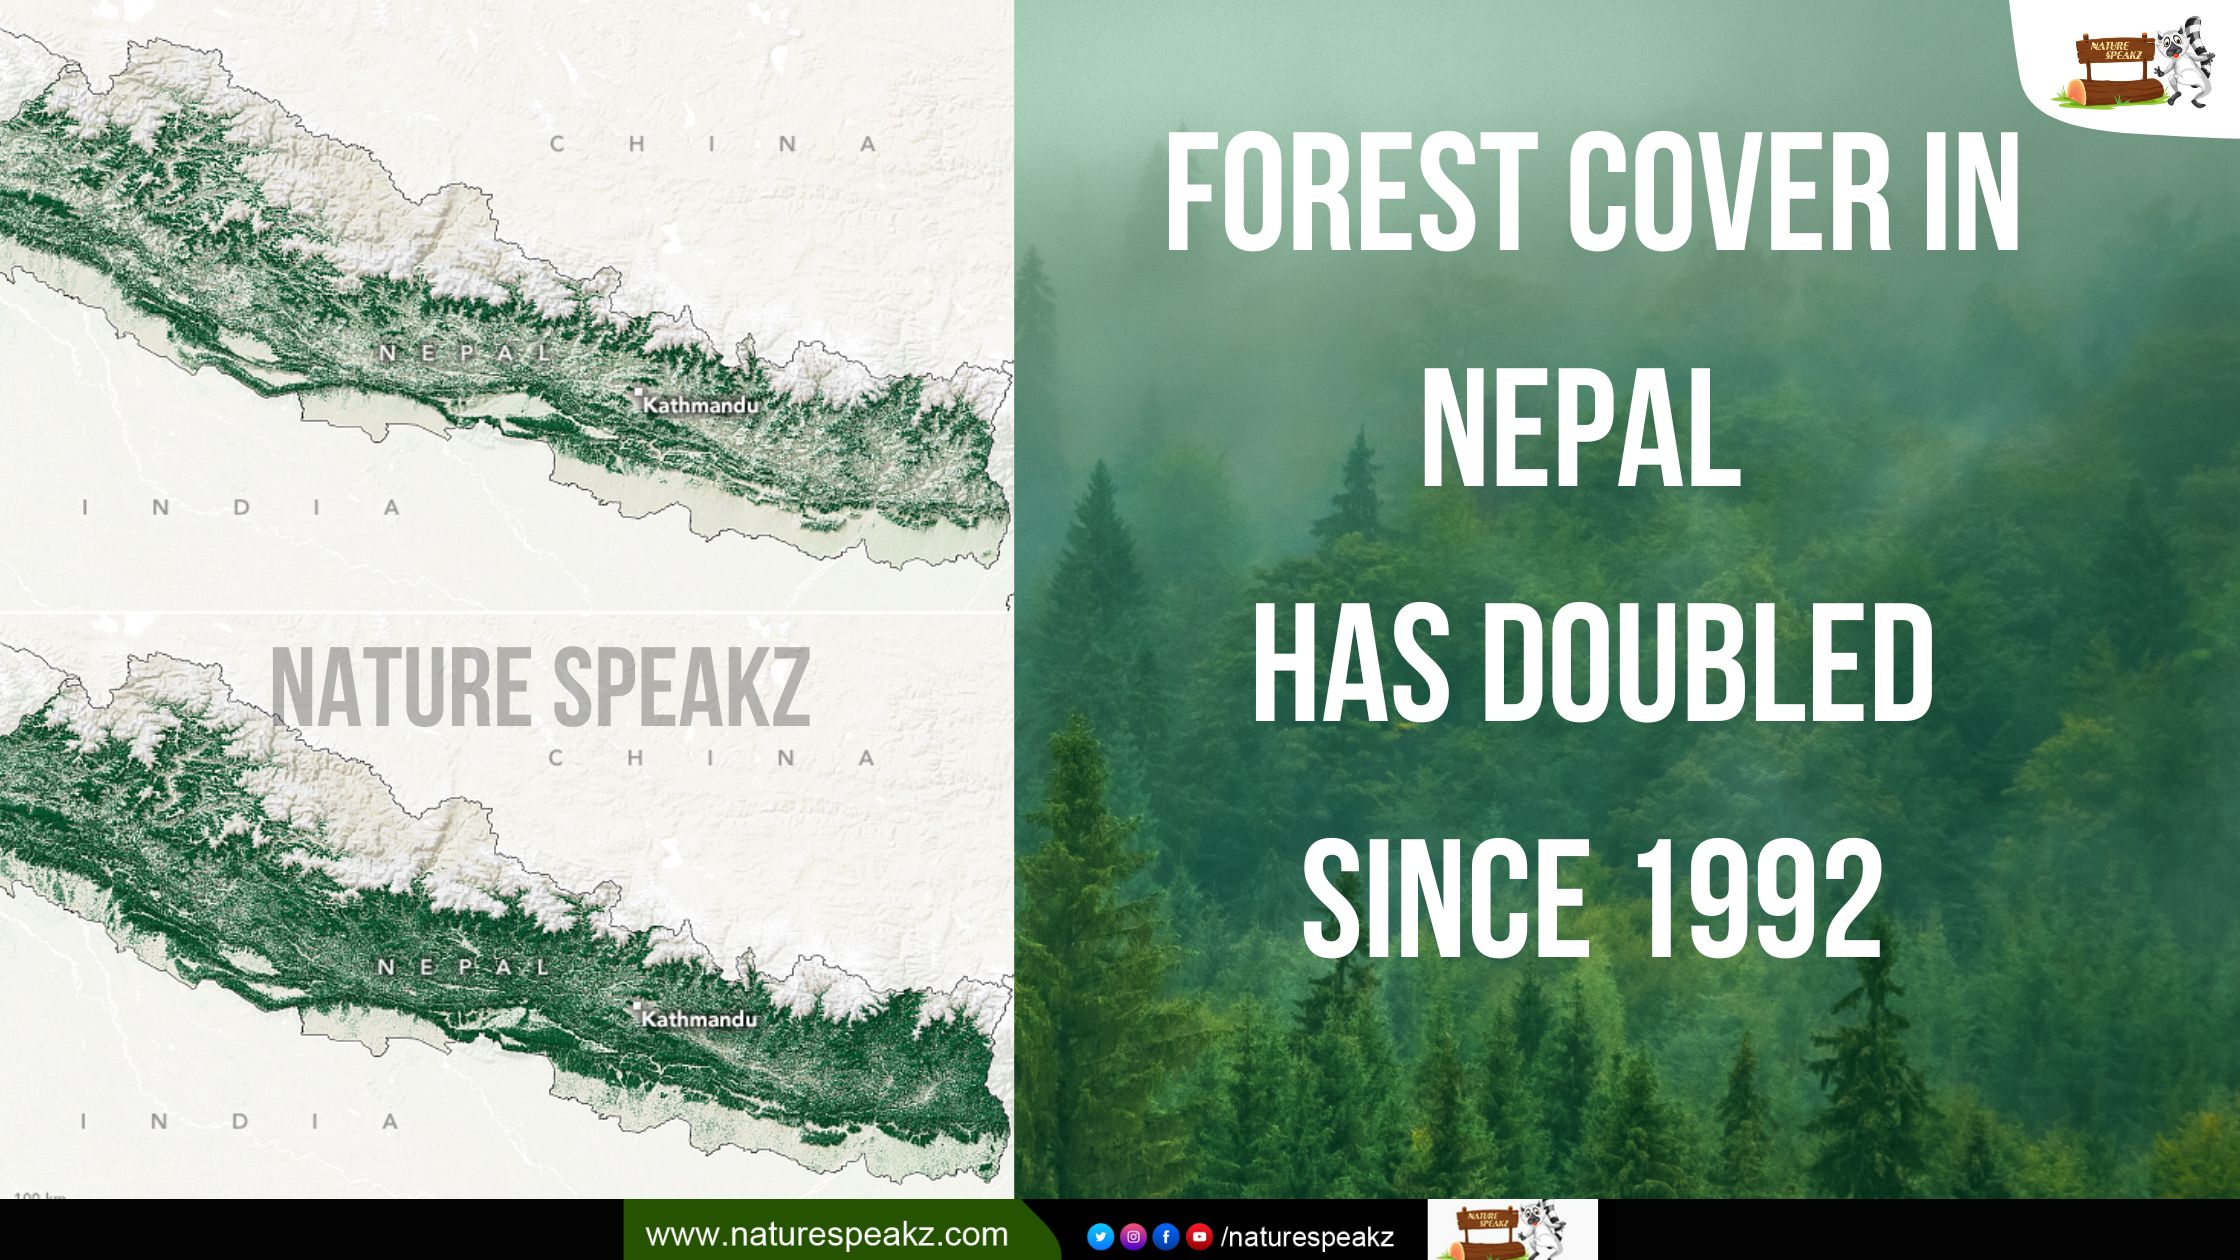 Forest cover in Nepal has doubled since 1992